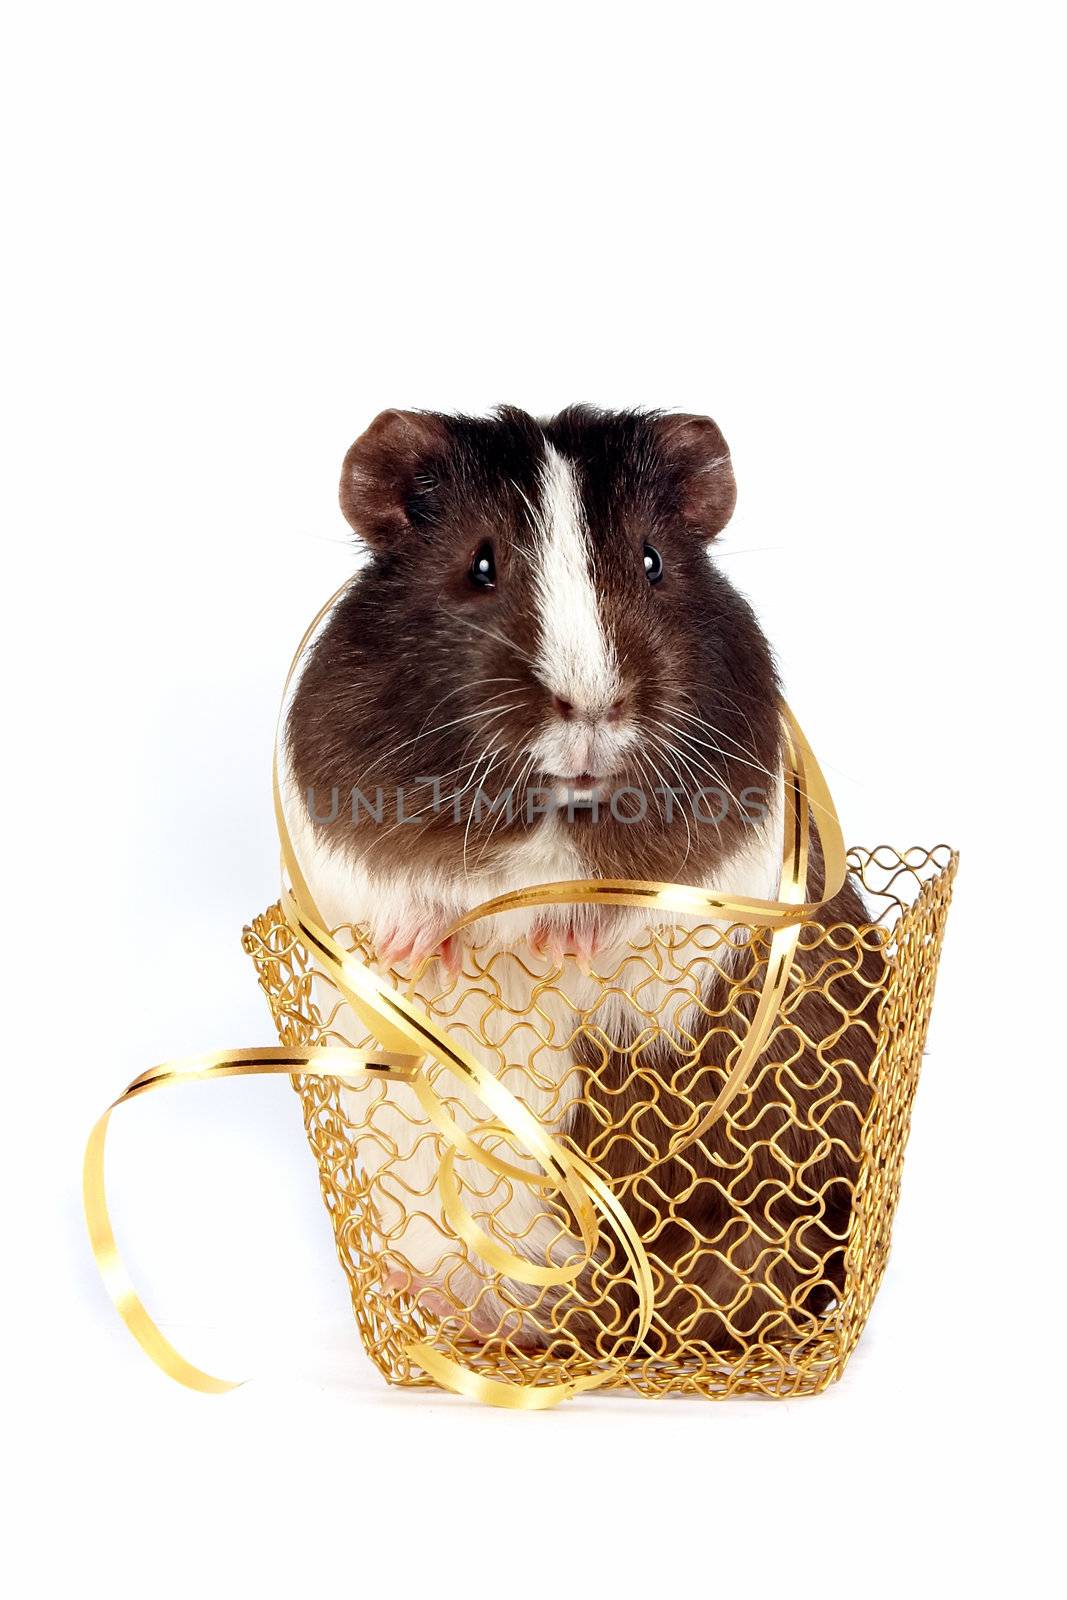 Guinea pigs with a ribbon in a gold basket on a white background